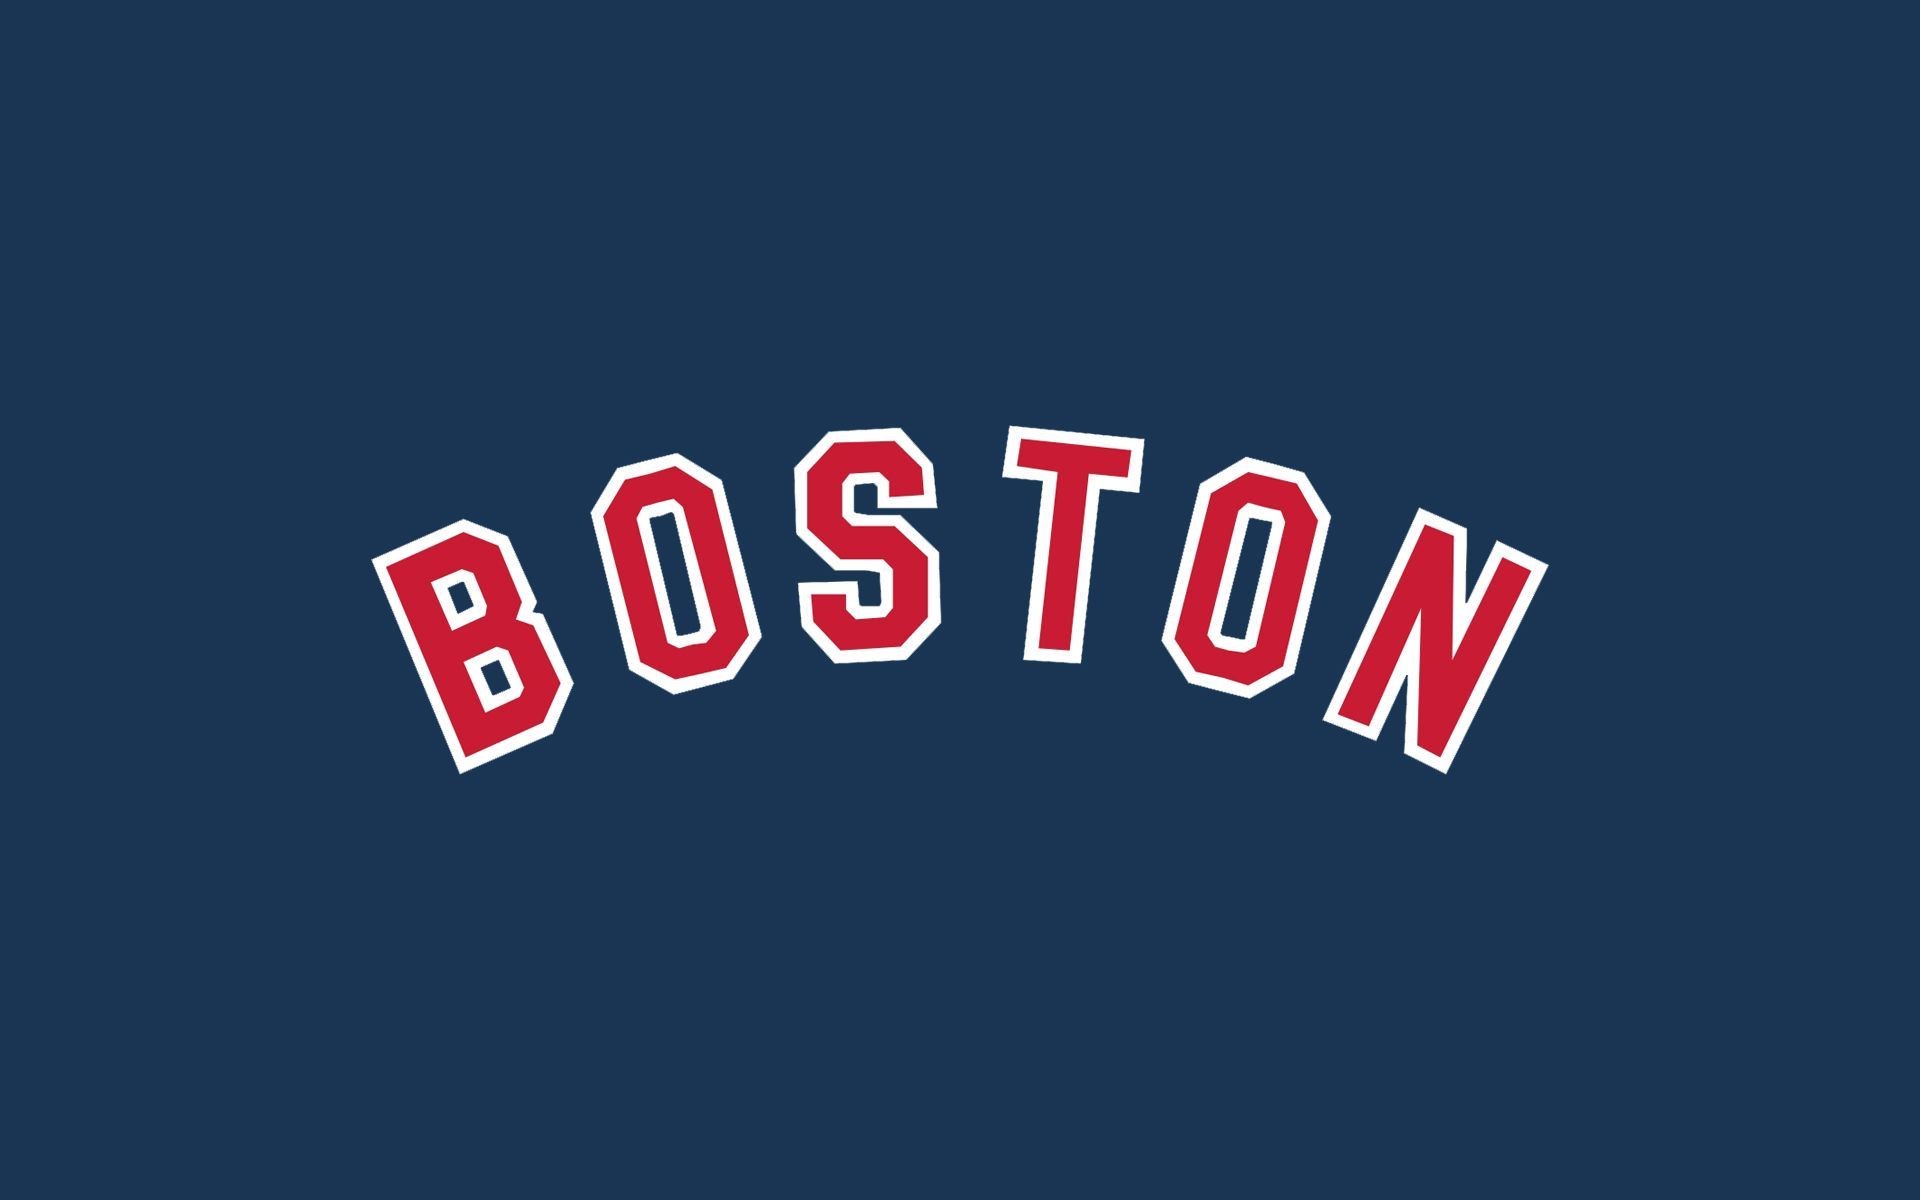 1920x1200 ... Amazing 4K Phone Wallpapers Red Sox Iphone Wallpaper in Red Sox Logo Wallpapers  Wallpaper Cave Pc